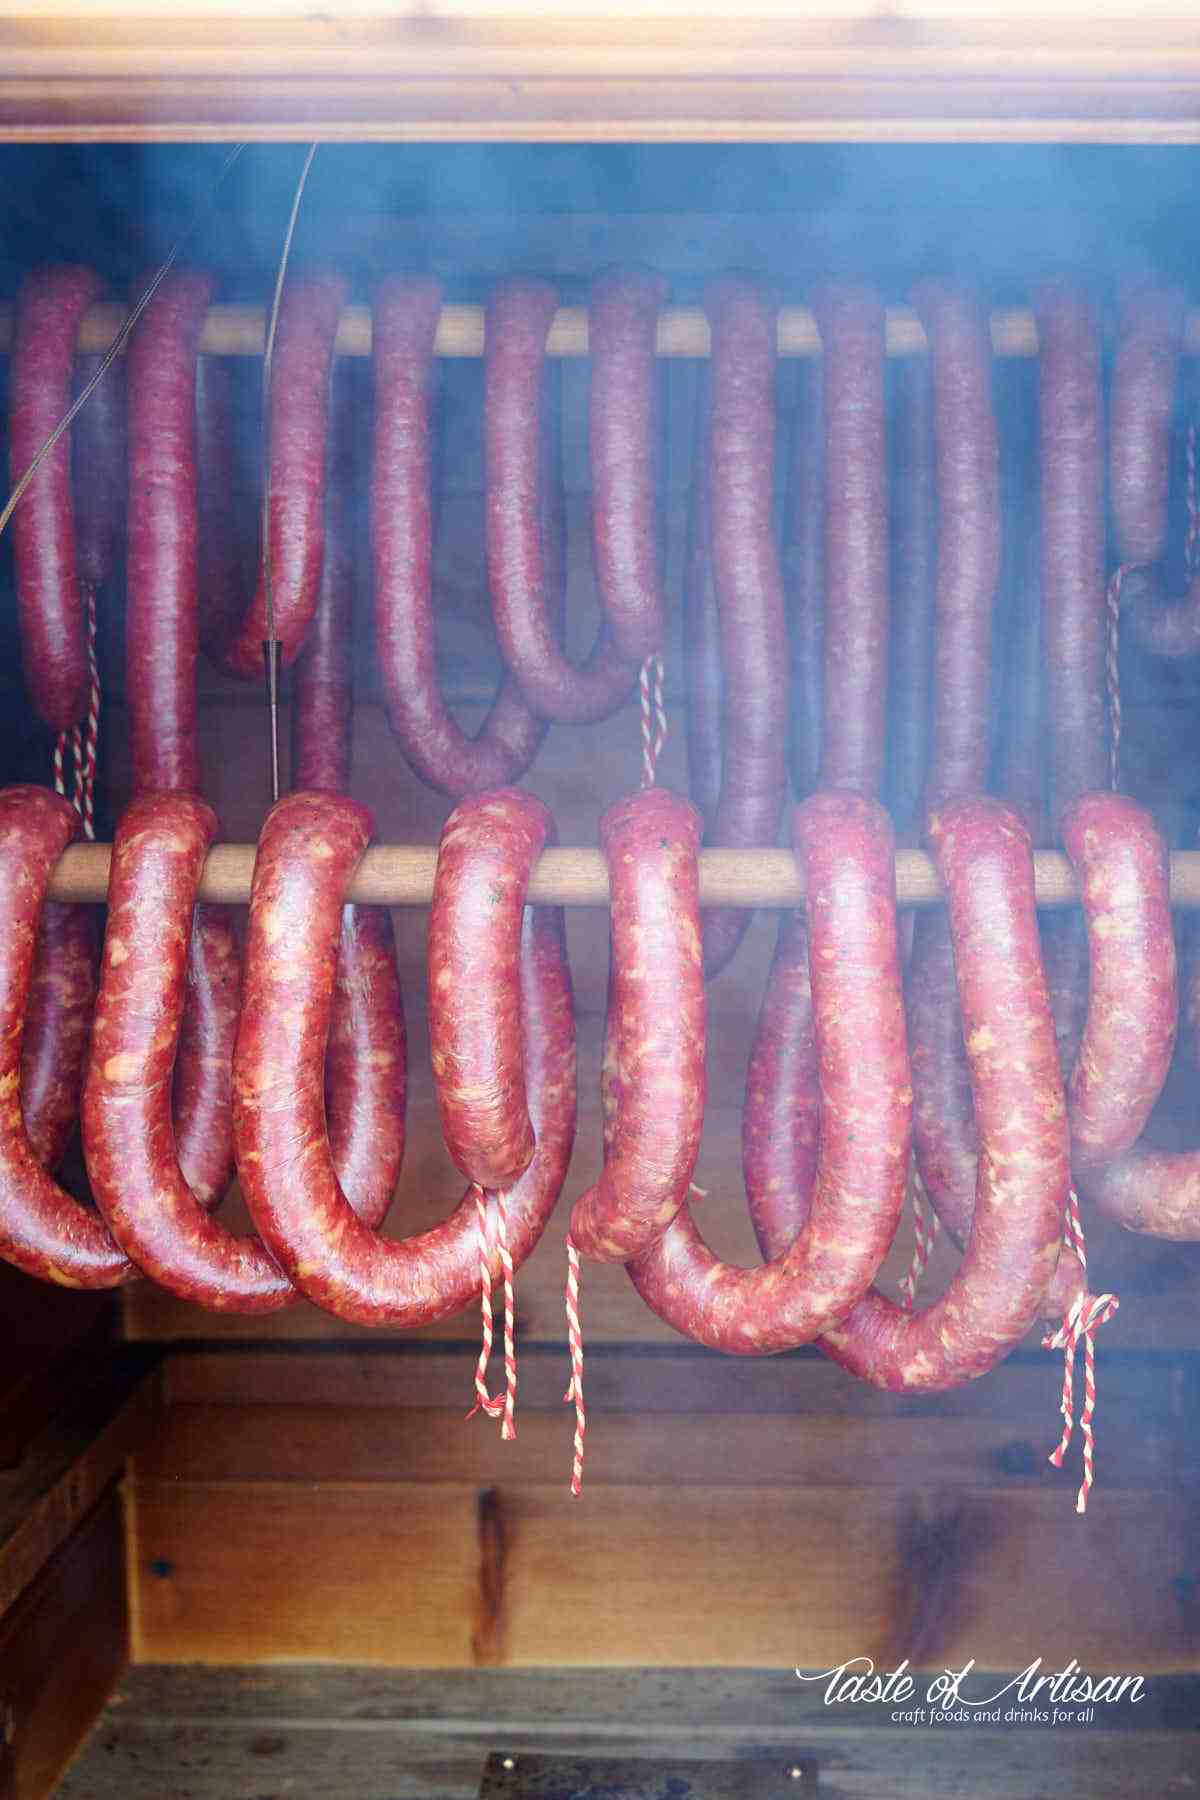 What is a real Polish sausage?